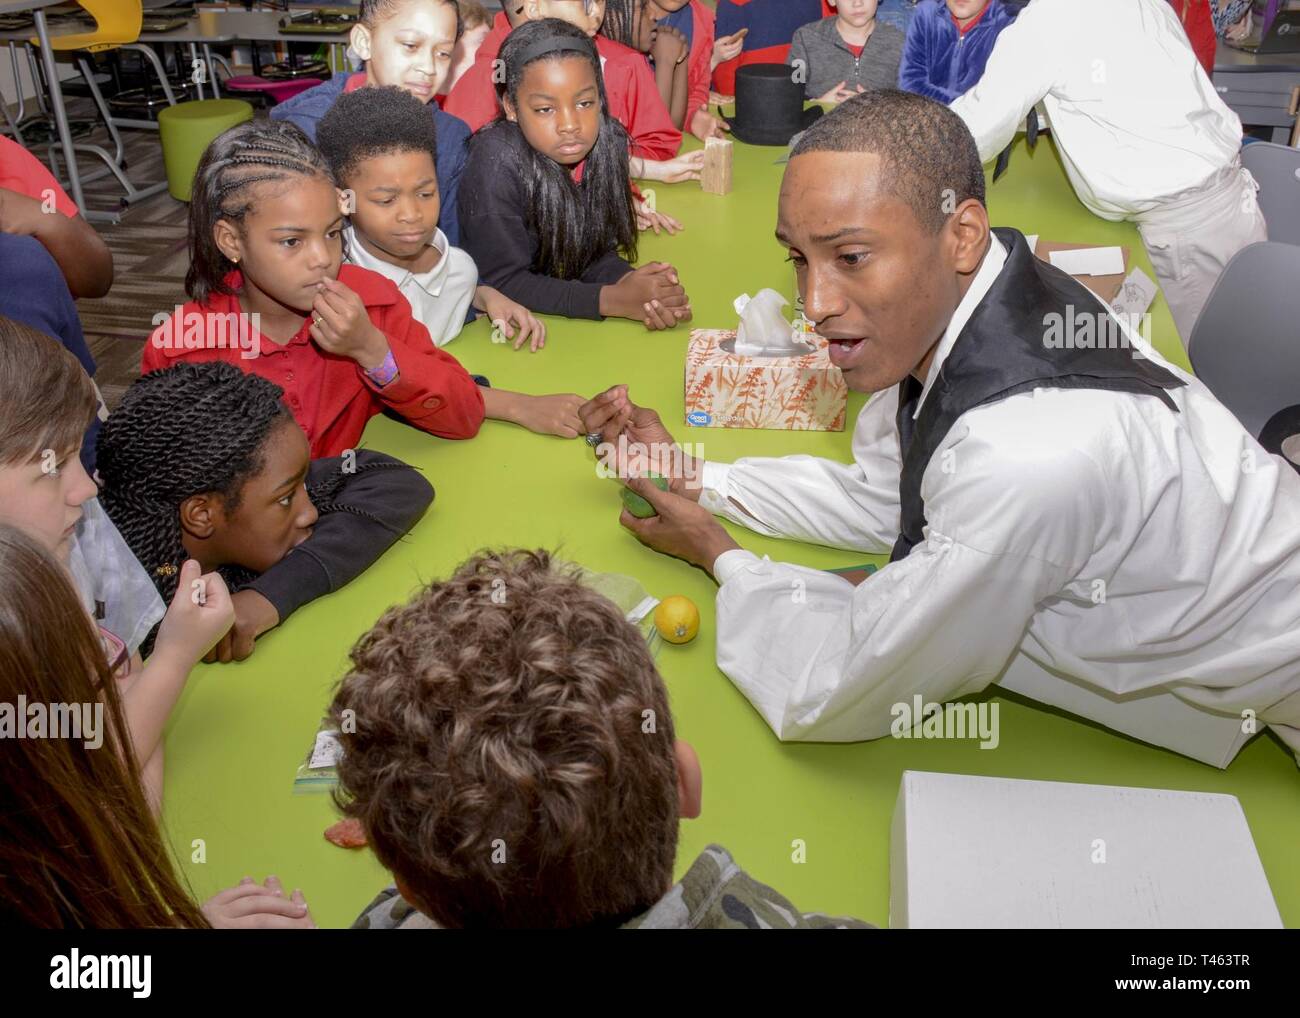 Ala. (Feb. 27, 2019) Personnel Specialist Seaman Jordan A. Young, from Red Oak, Texas, assigned to USS Constitution, shows students at Kate Shepard Elementary School in Mobile, Alabama, the food an 'Old Ironsides' sailor would eat in 1812 during Mobile Alabama Navy Week. Mobile is one of the select cities to host a 2019 Navy Week, a week dedicated to raising U.S. Navy awareness through local outreach, community service and exhibitions. Stock Photo